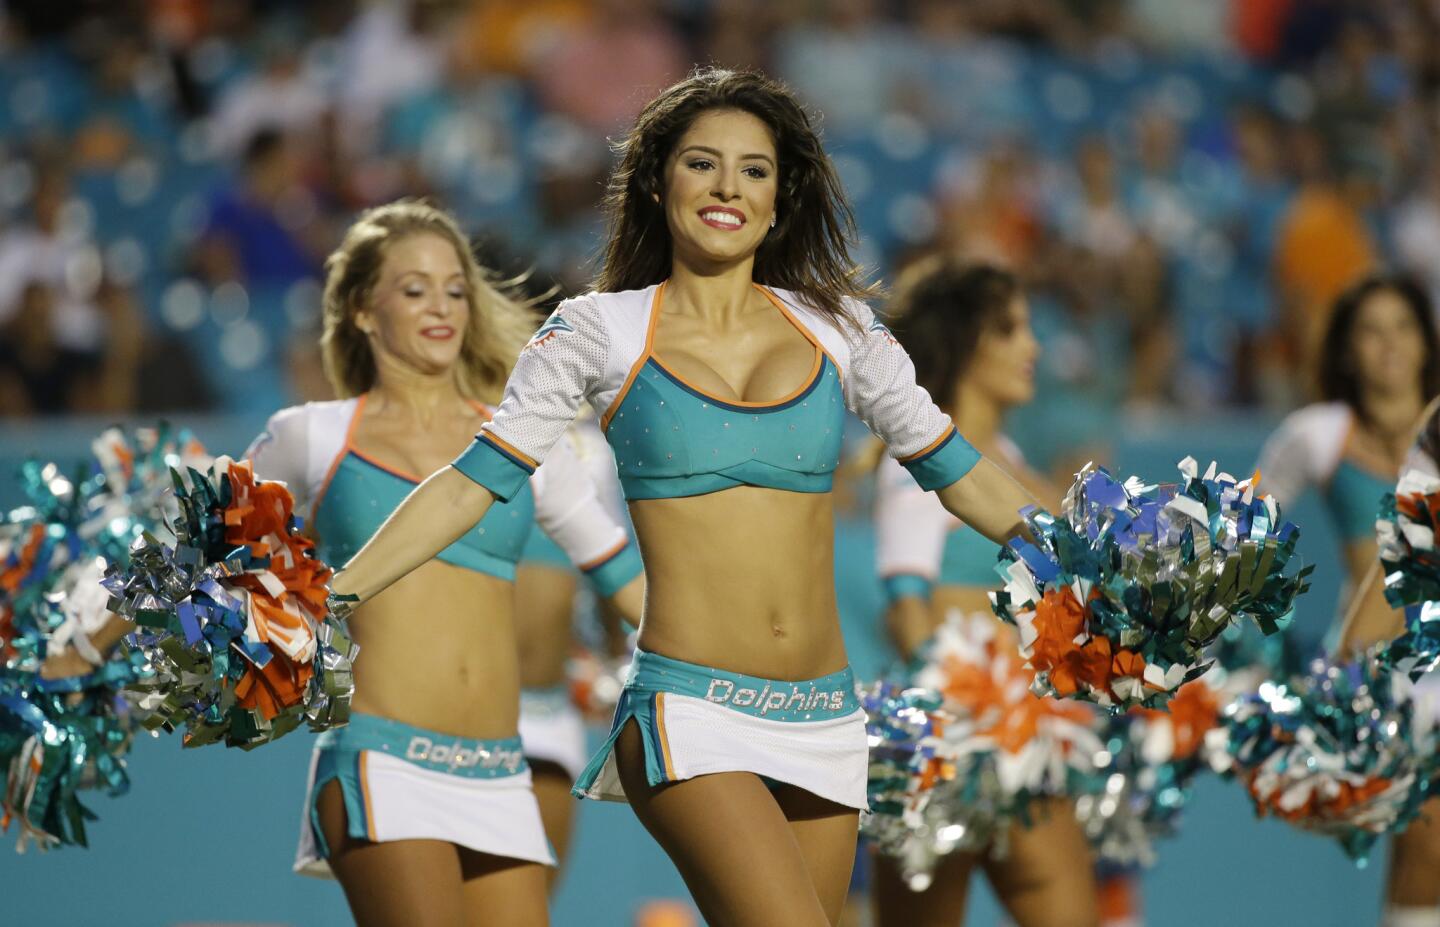 Miami Dolphins cheerleaders perform during the first half of an NFL preseason football game against the Atlanta Falcons, Saturday, Aug. 29, 2015 in Miami Gardens, Fla. (AP Photo/Wilfredo Lee) ORG XMIT: OTK ORG XMIT: S-S1508292023401040